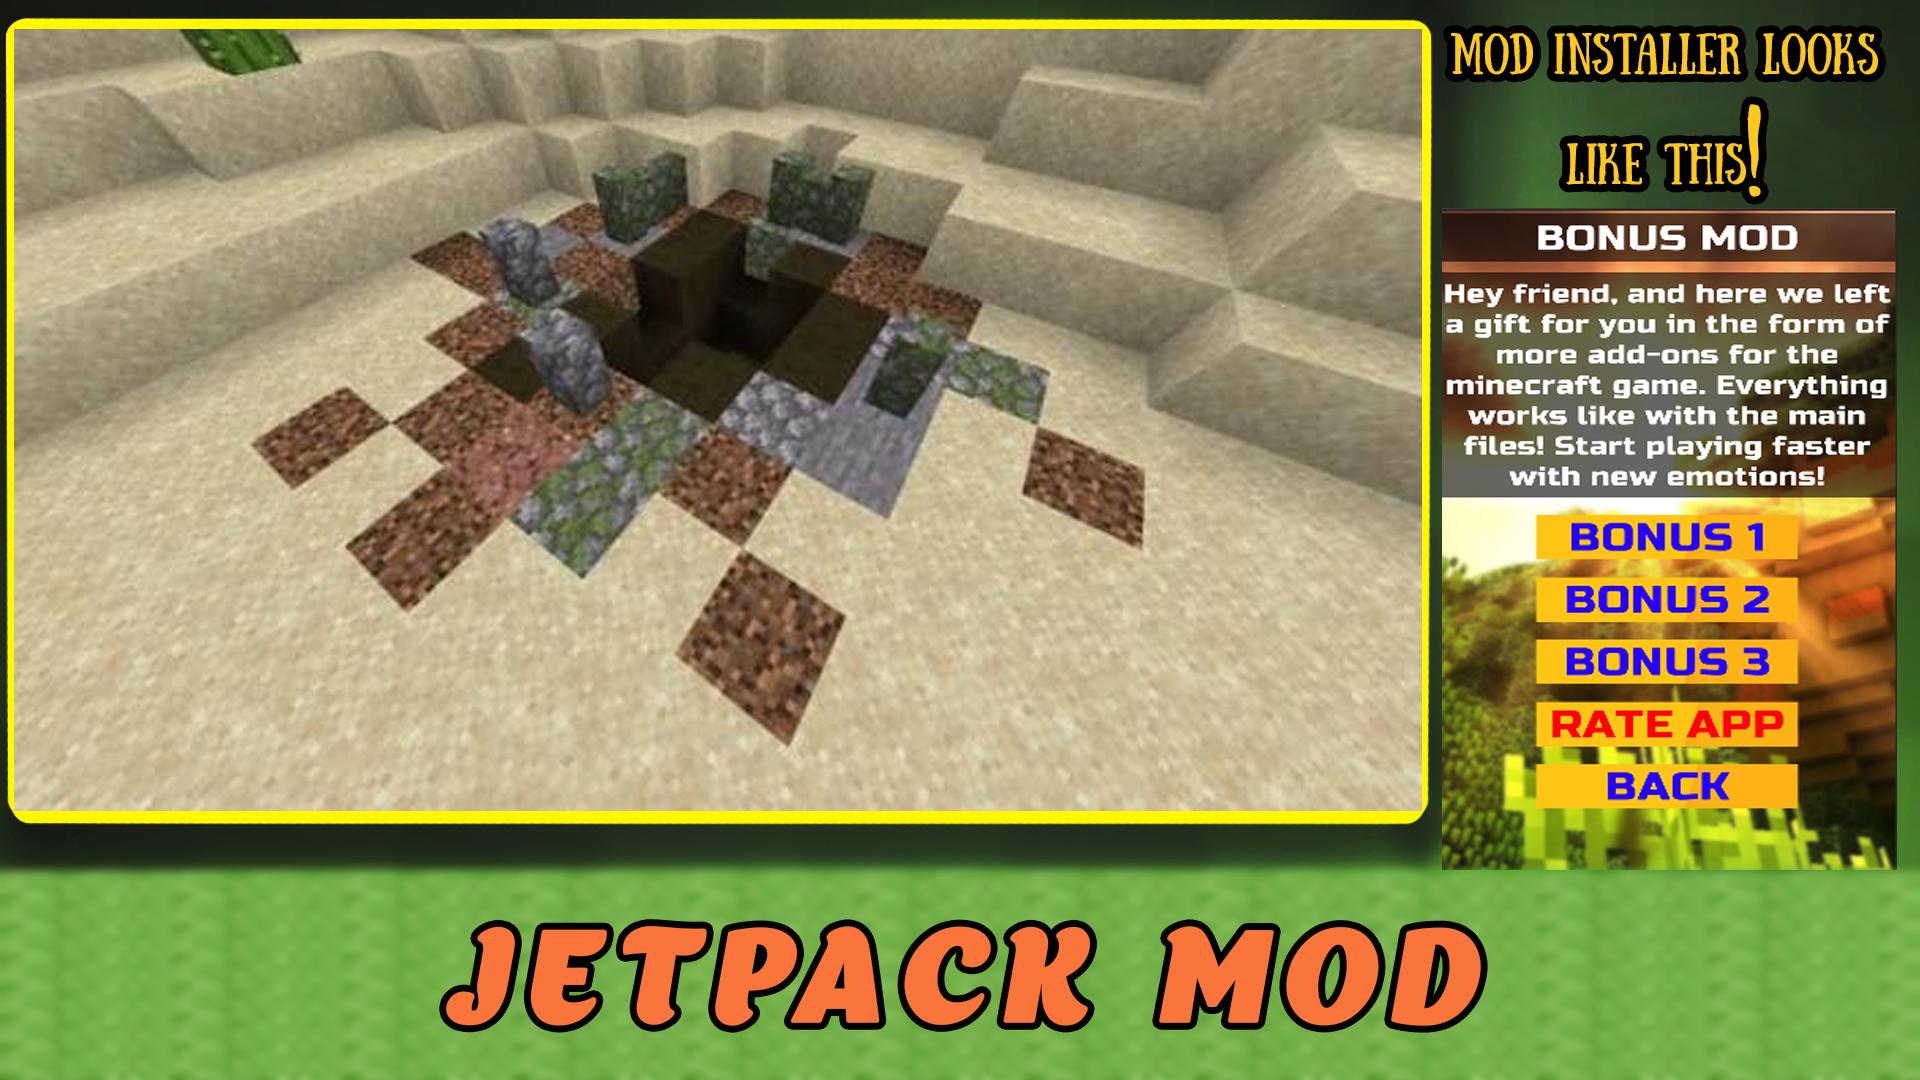 Download Jetpack Mod for Minecraft android on PC